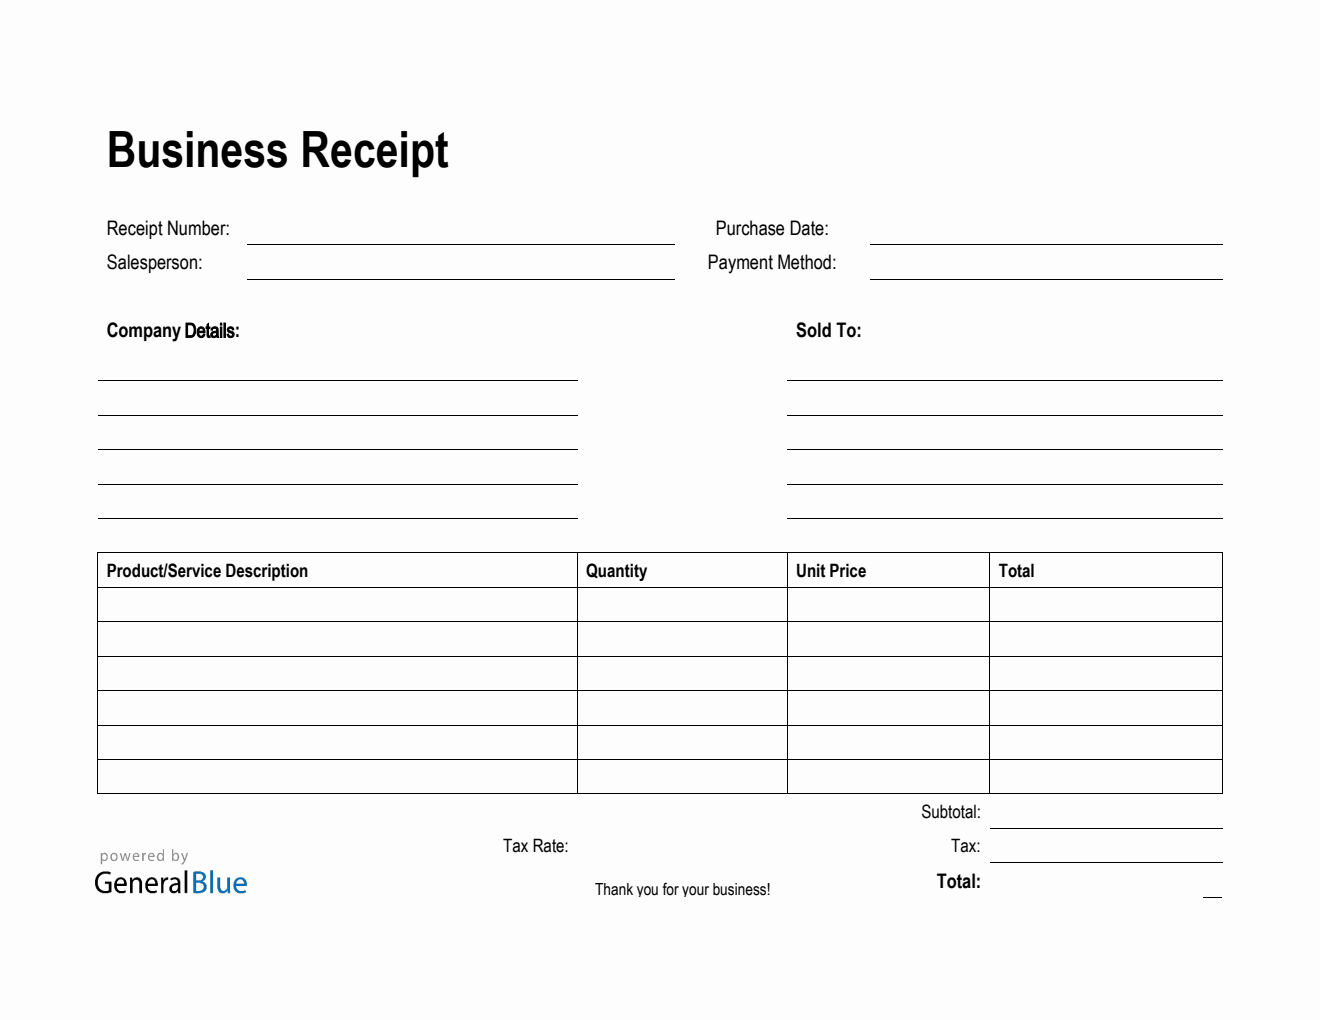 Printable Business Receipt Template in PDF